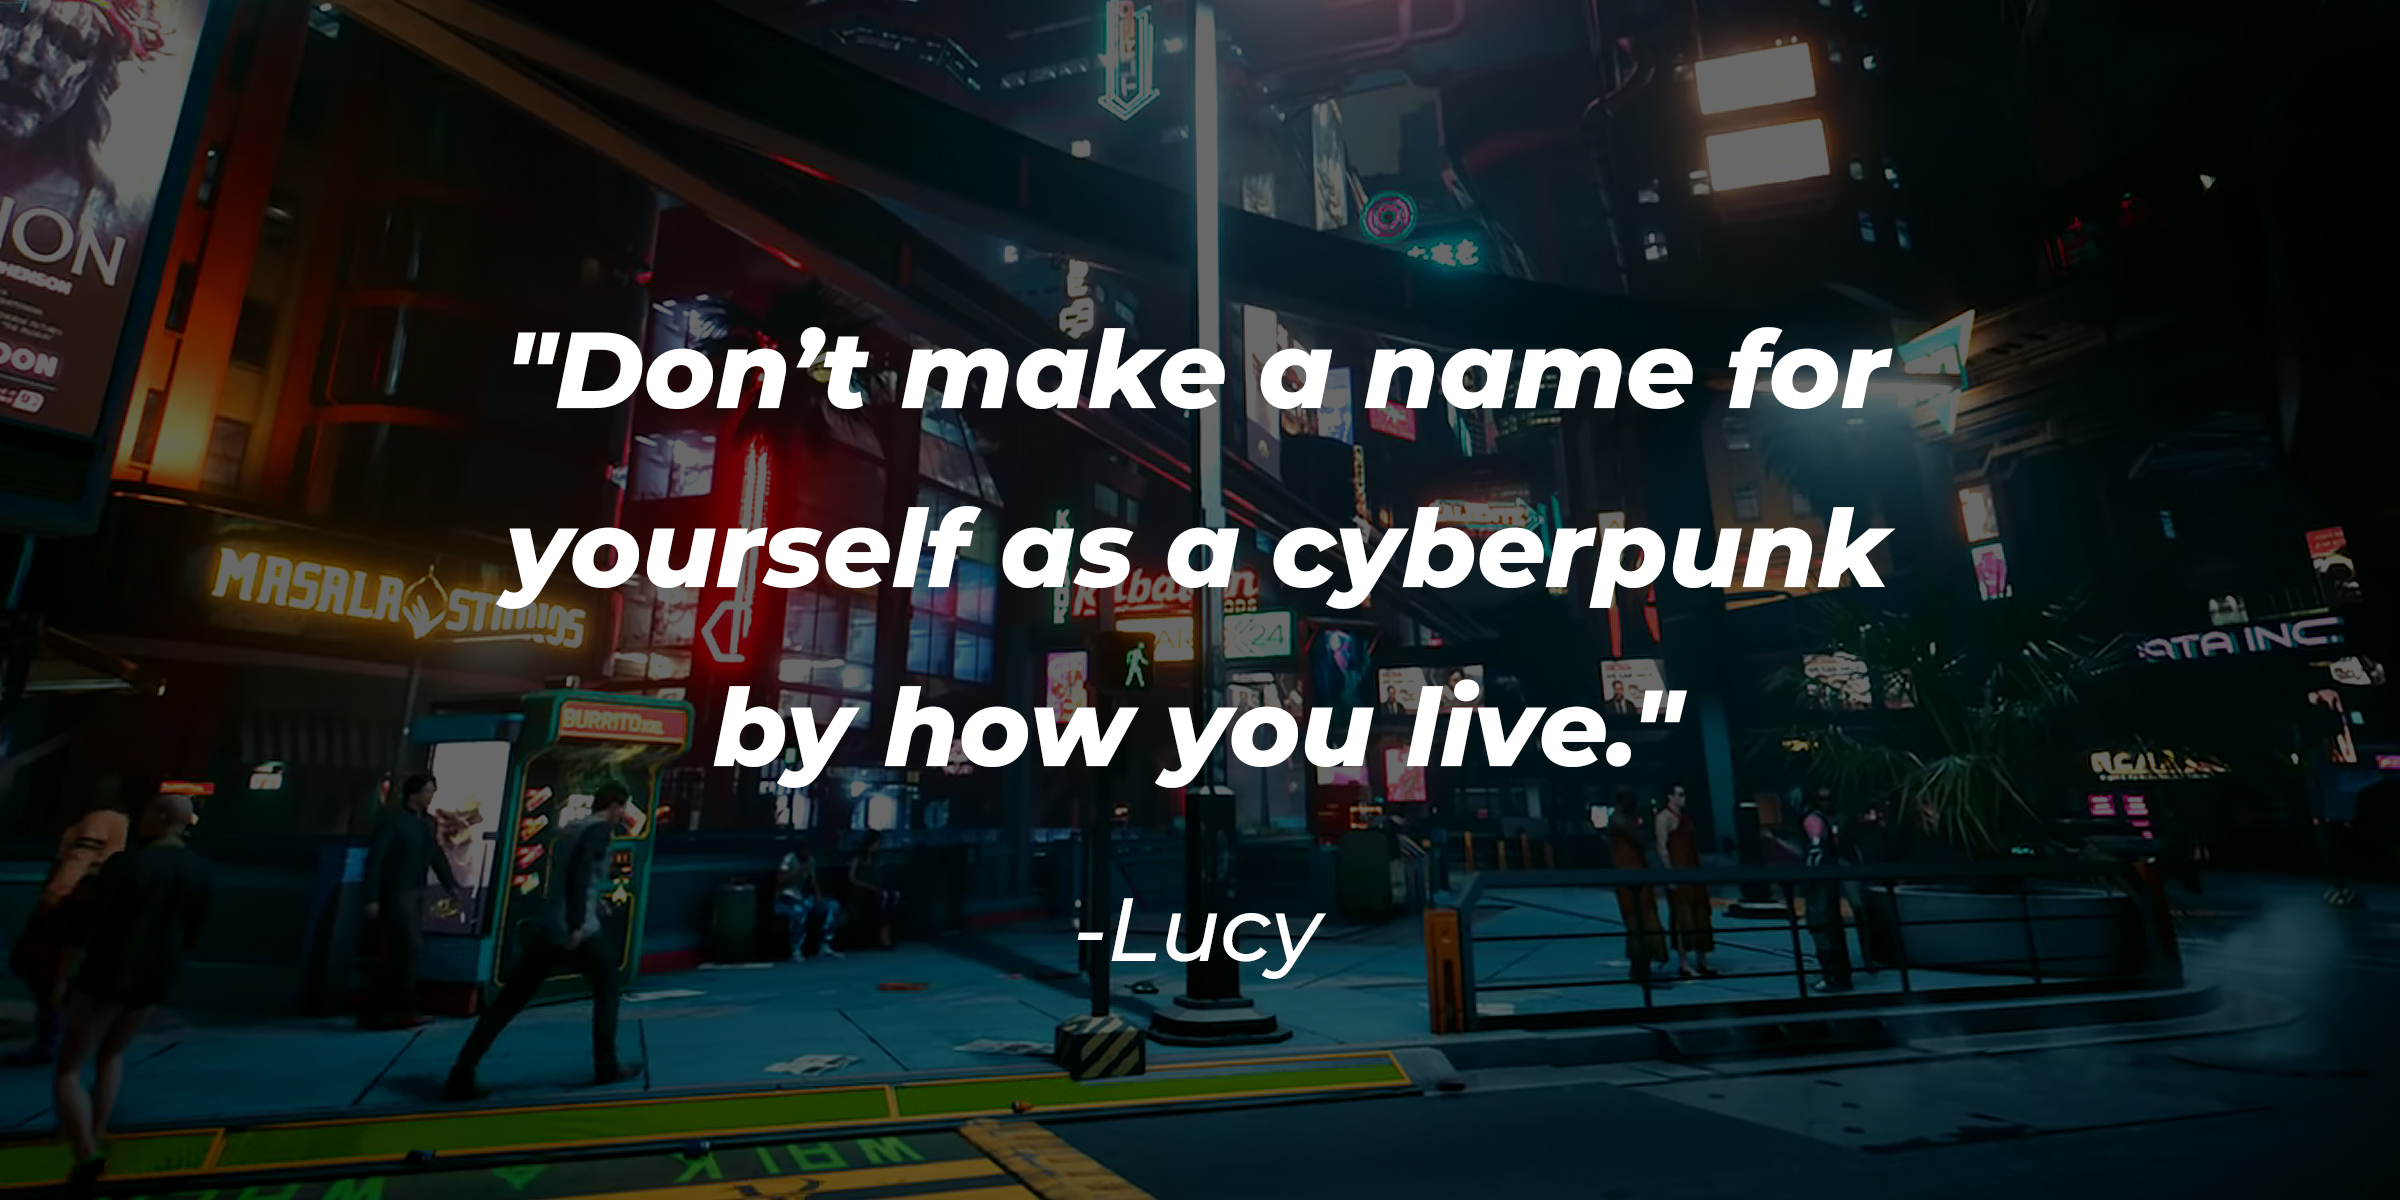 Lucy’s quote: "Don’t make a name for yourself as a cyberpunk by how you live." | Source: Youtube.com/CyberpunkGame